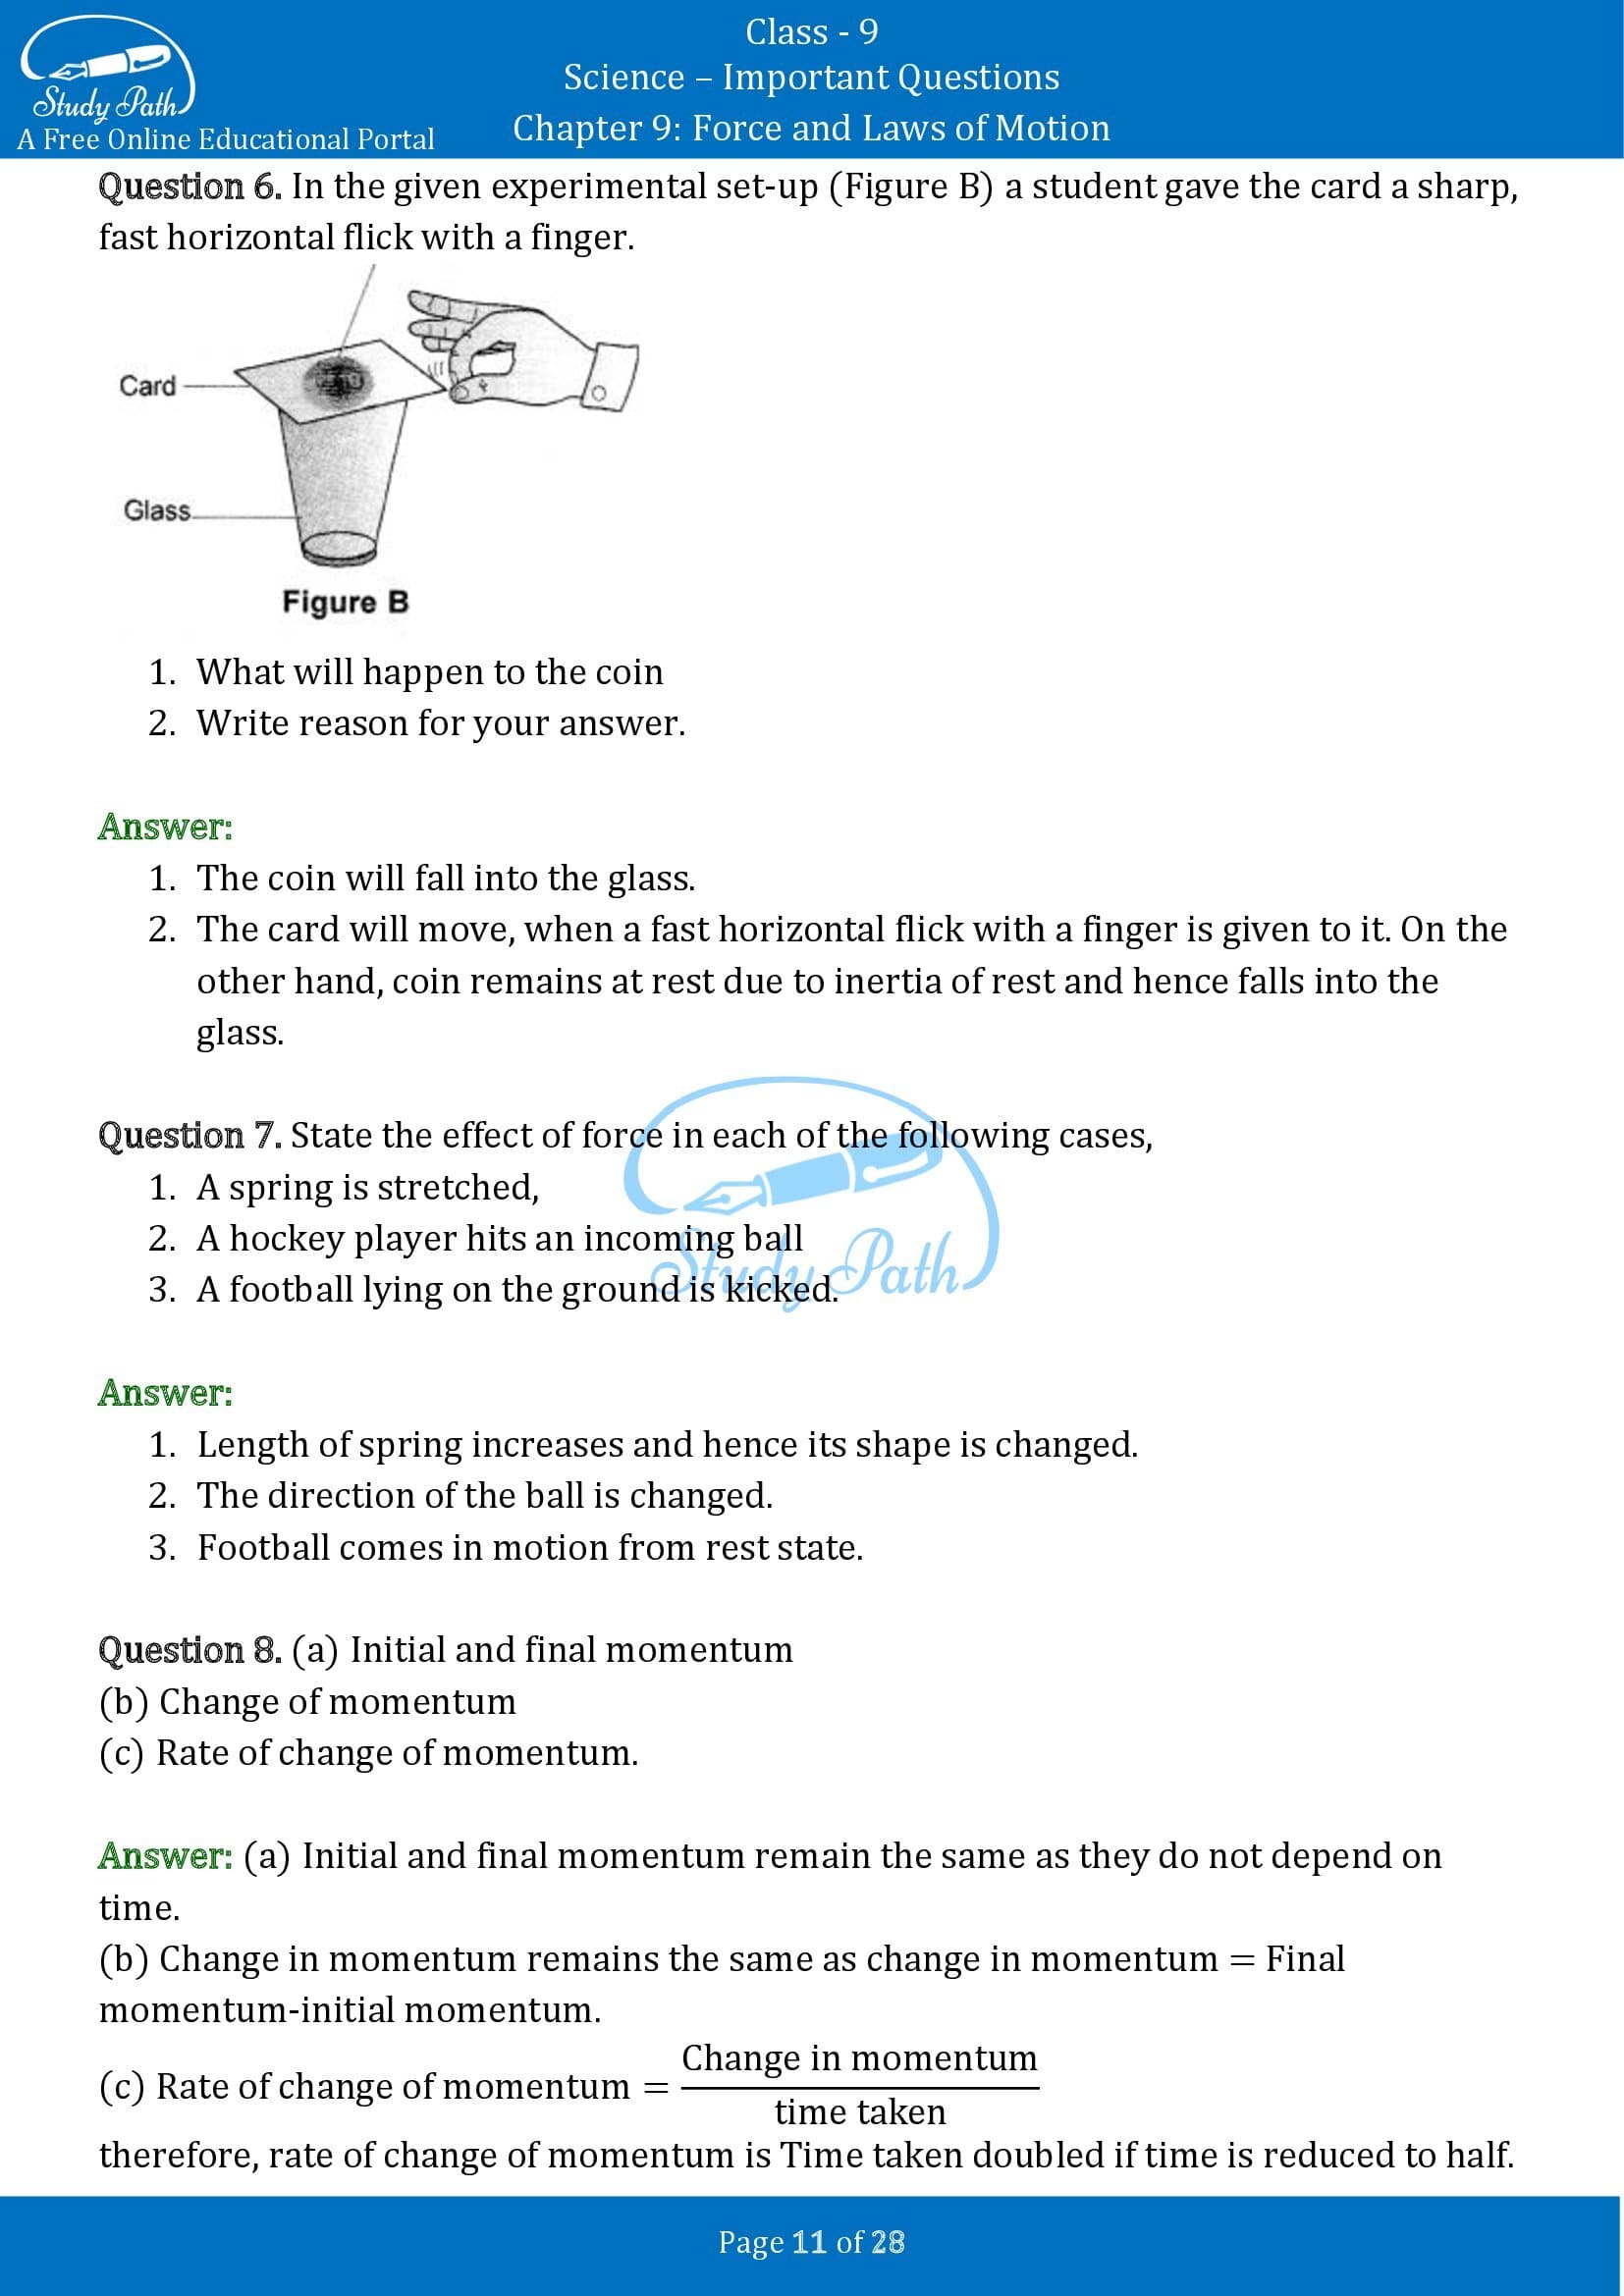 Important Questions for Class 9 Science Chapter 9 Force and Laws of Motion 00011